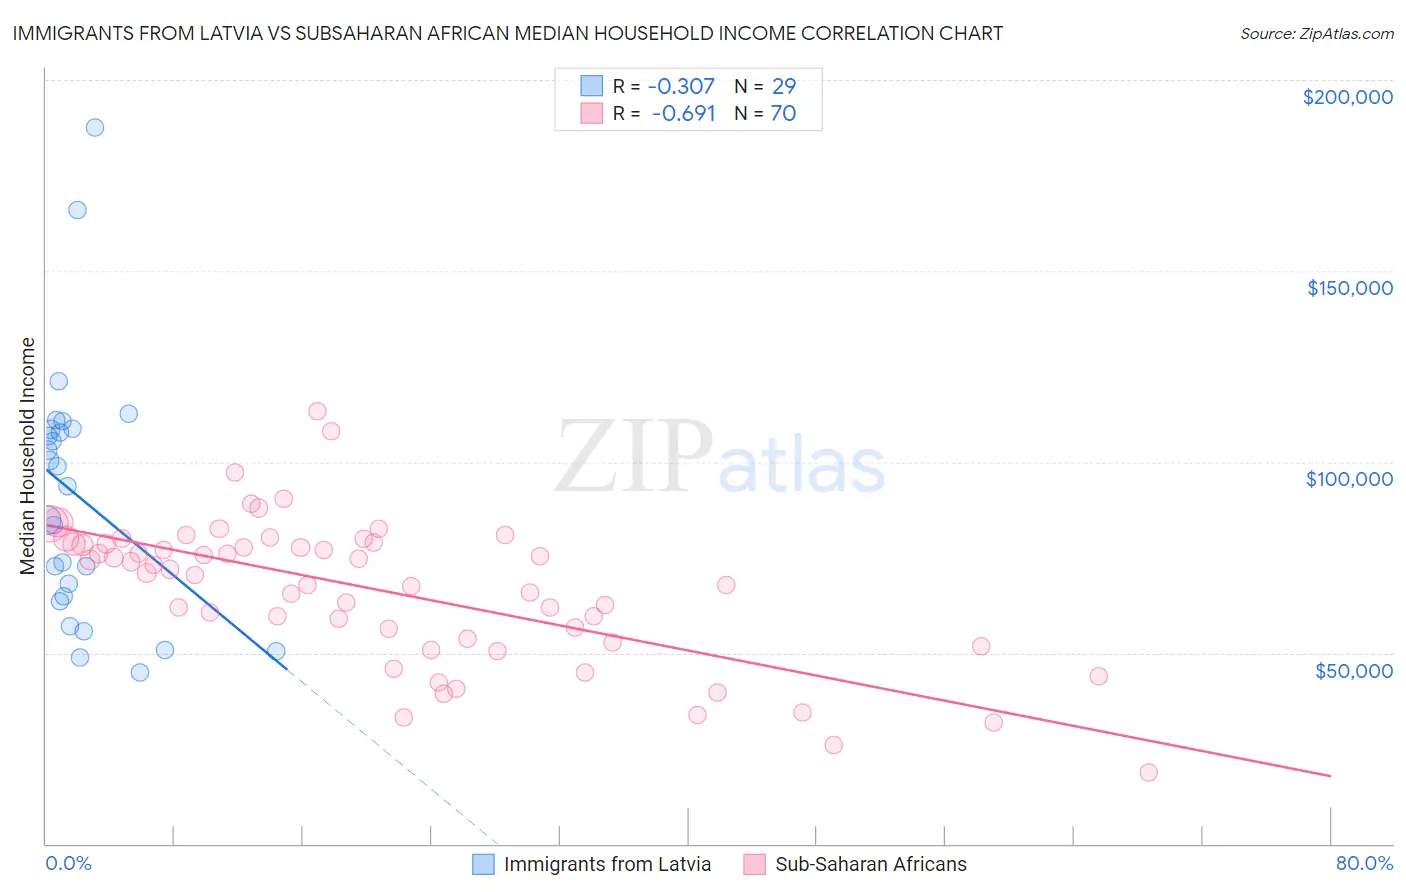 Immigrants from Latvia vs Subsaharan African Median Household Income